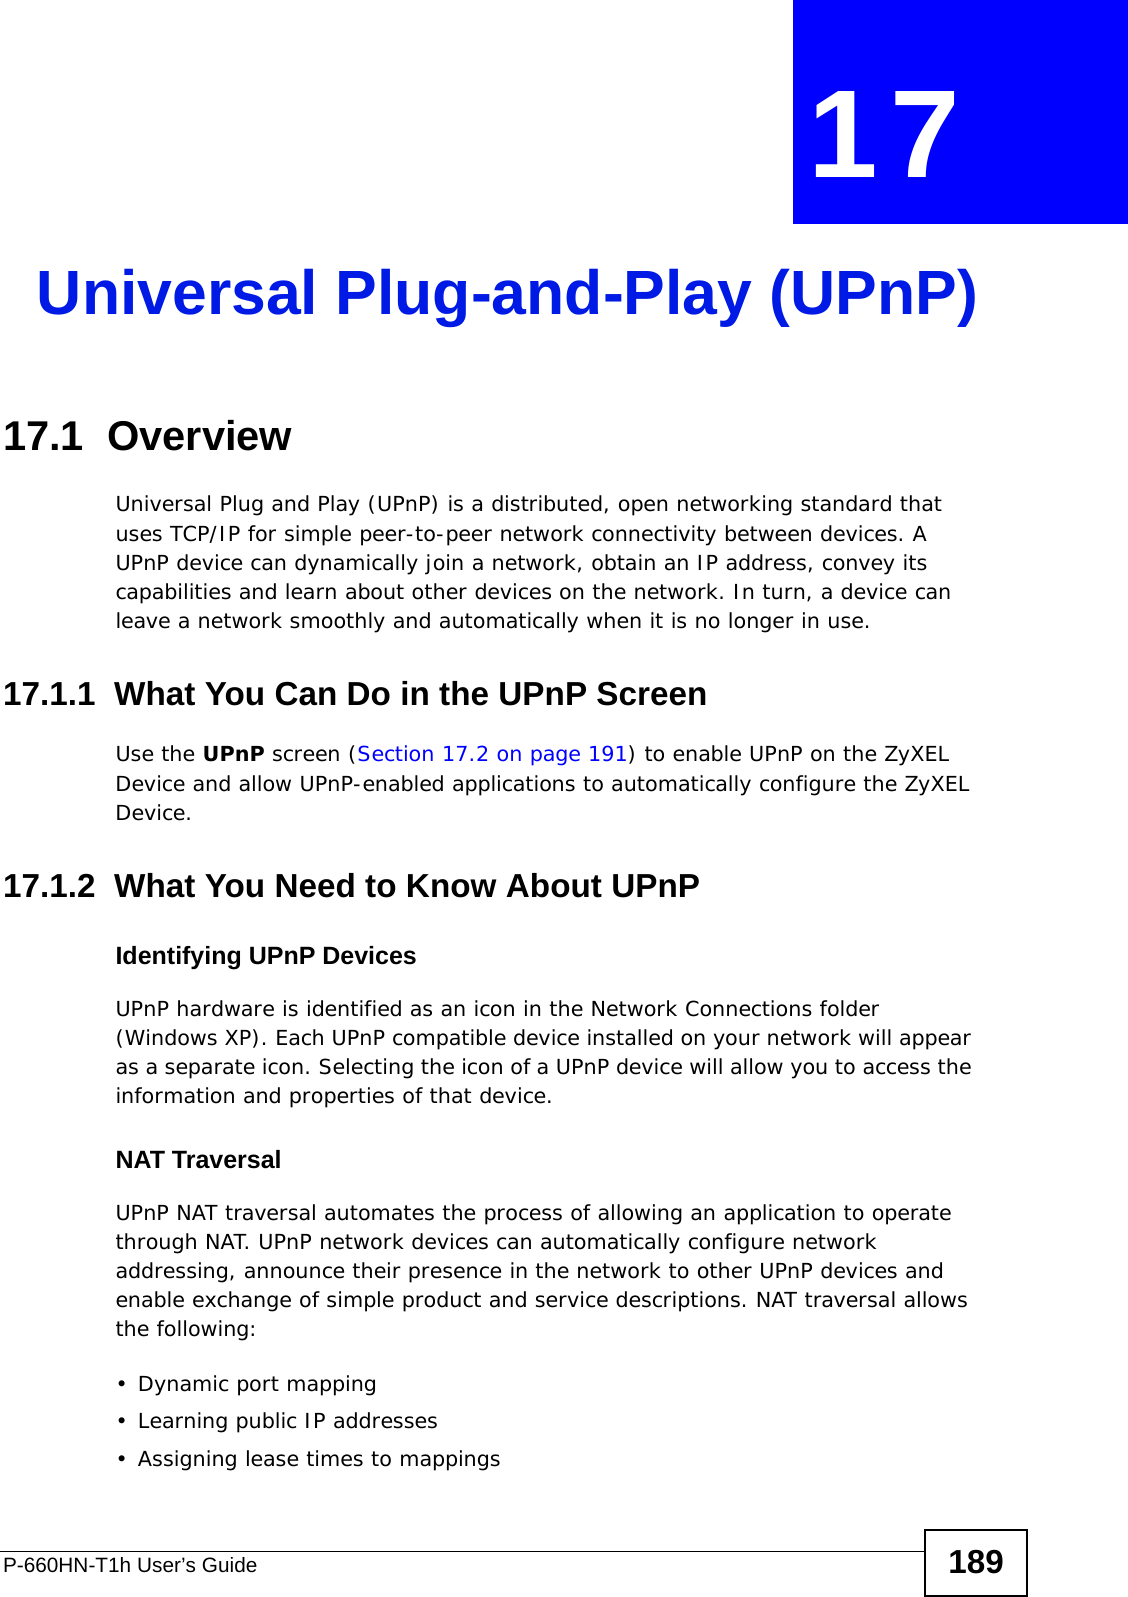 P-660HN-T1h User’s Guide 189CHAPTER  17 Universal Plug-and-Play (UPnP)17.1  OverviewUniversal Plug and Play (UPnP) is a distributed, open networking standard that uses TCP/IP for simple peer-to-peer network connectivity between devices. A UPnP device can dynamically join a network, obtain an IP address, convey its capabilities and learn about other devices on the network. In turn, a device can leave a network smoothly and automatically when it is no longer in use.17.1.1  What You Can Do in the UPnP ScreenUse the UPnP screen (Section 17.2 on page 191) to enable UPnP on the ZyXEL Device and allow UPnP-enabled applications to automatically configure the ZyXEL Device.17.1.2  What You Need to Know About UPnPIdentifying UPnP DevicesUPnP hardware is identified as an icon in the Network Connections folder (Windows XP). Each UPnP compatible device installed on your network will appear as a separate icon. Selecting the icon of a UPnP device will allow you to access the information and properties of that device. NAT TraversalUPnP NAT traversal automates the process of allowing an application to operate through NAT. UPnP network devices can automatically configure network addressing, announce their presence in the network to other UPnP devices and enable exchange of simple product and service descriptions. NAT traversal allows the following:• Dynamic port mapping• Learning public IP addresses• Assigning lease times to mappings